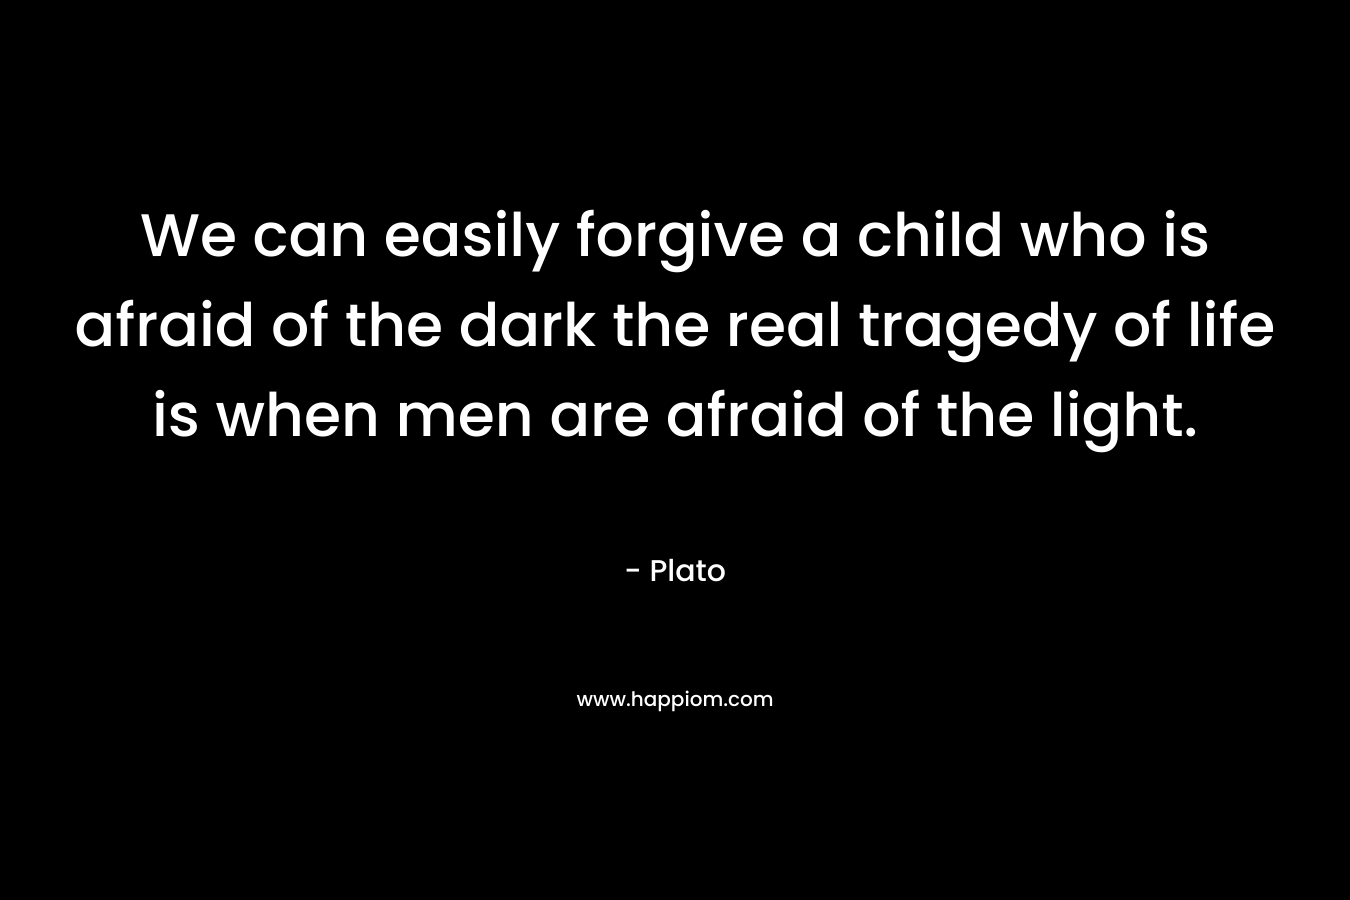 We can easily forgive a child who is afraid of the dark the real tragedy of life is when men are afraid of the light. 